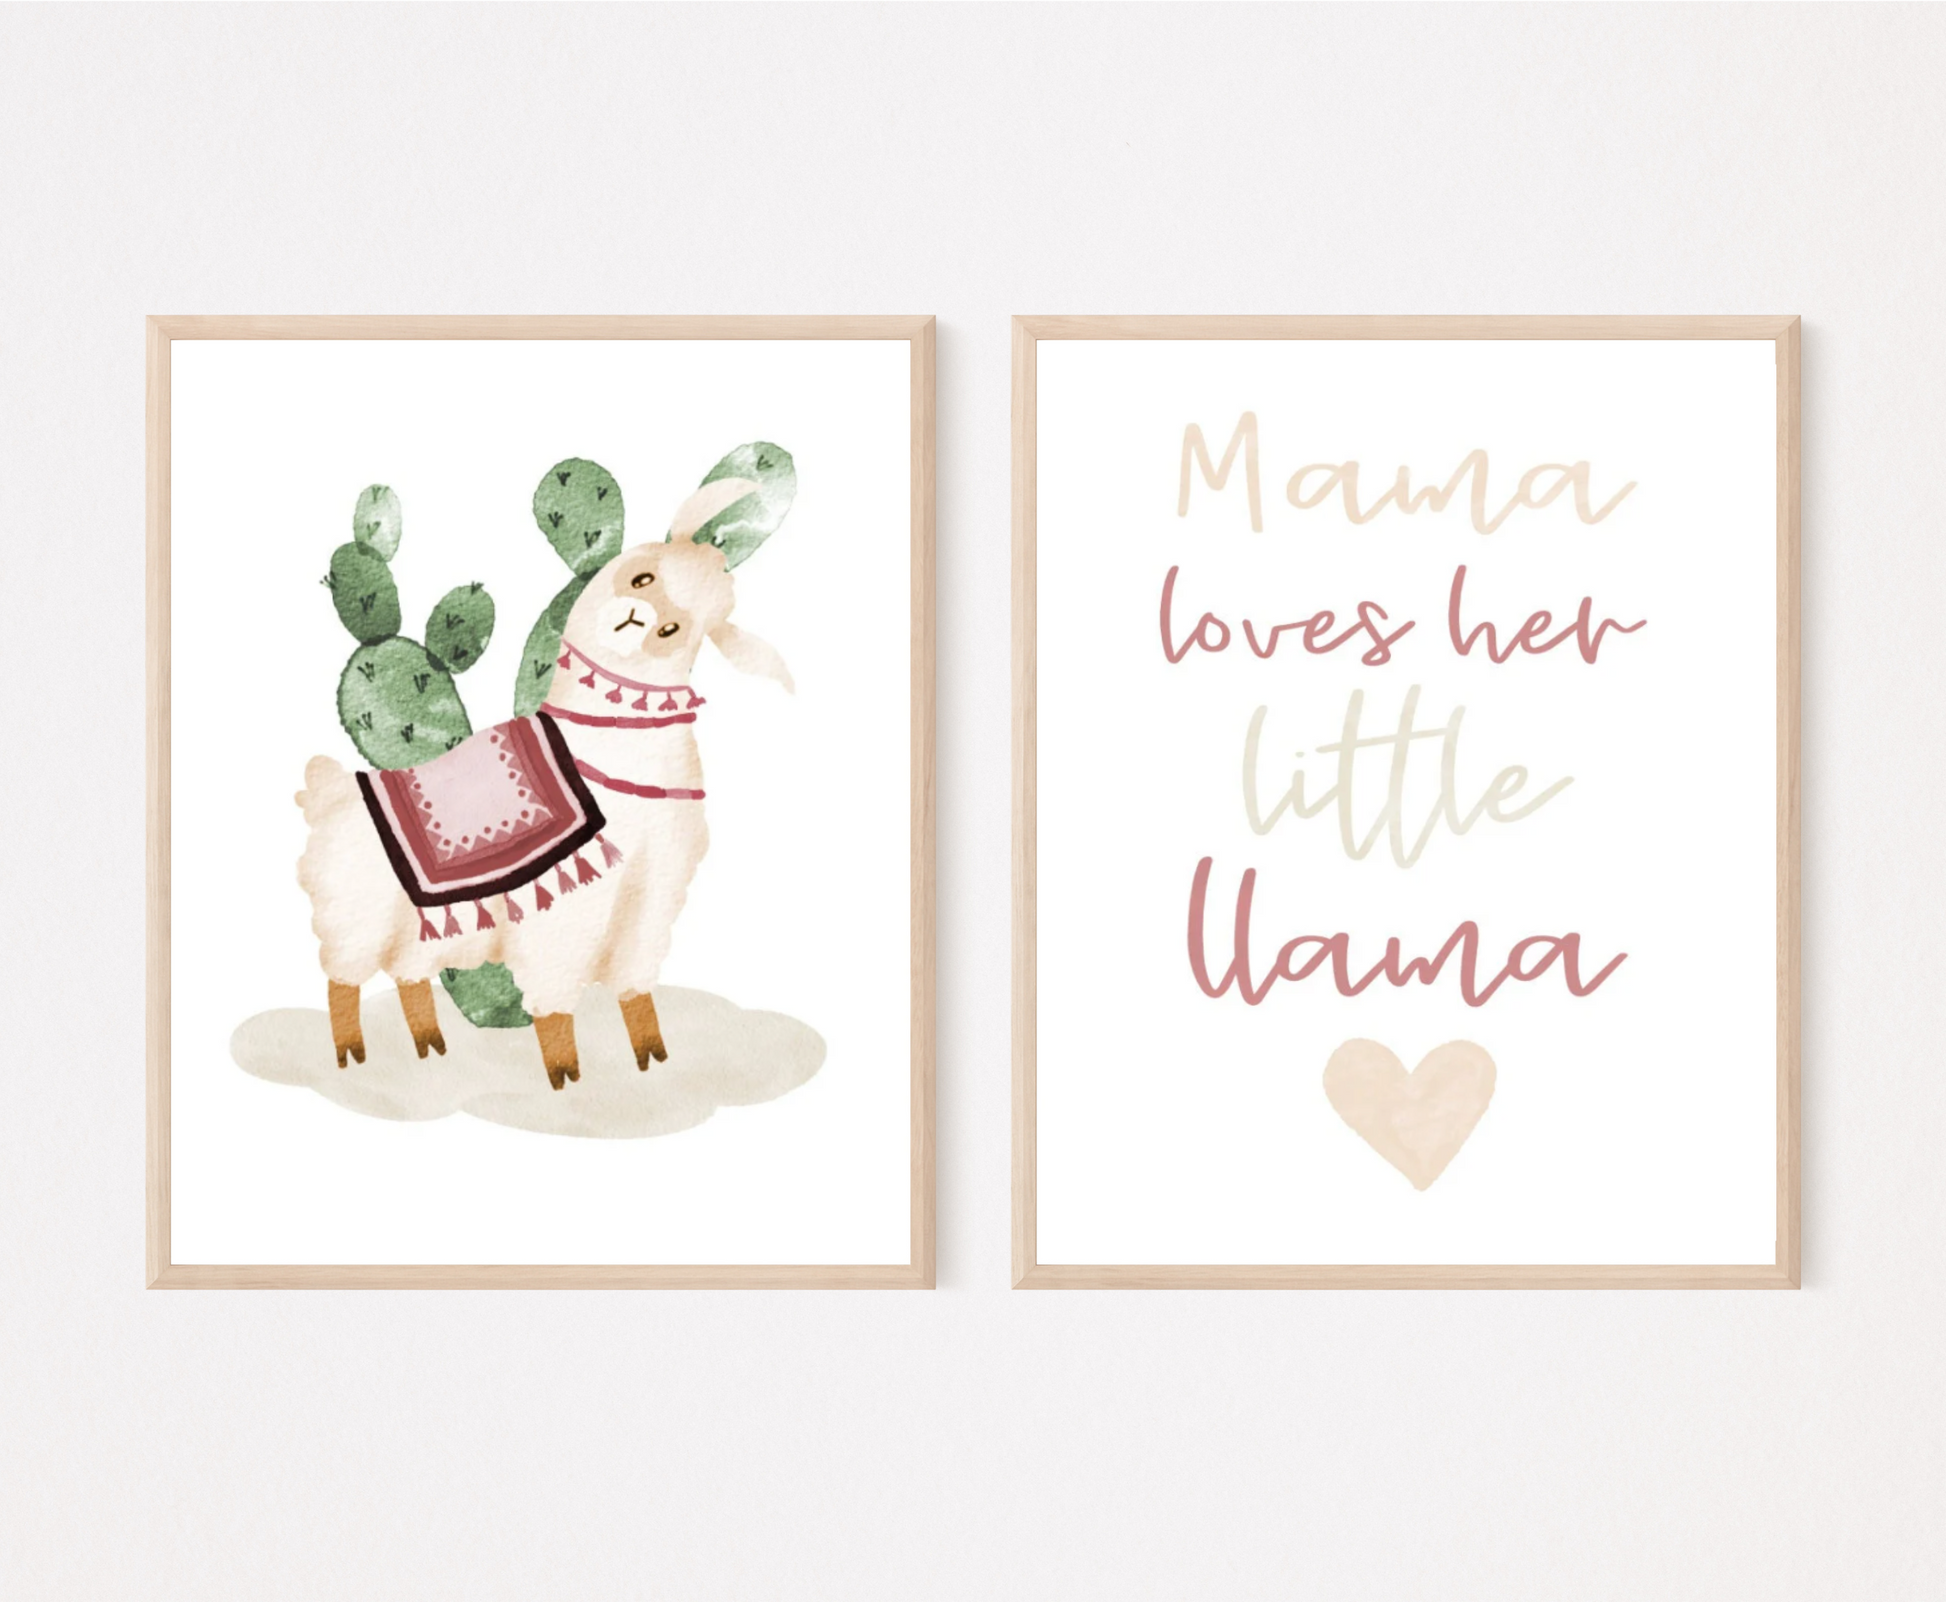 An image of two digital graphics. The first one displays an illustration of a cute lama wearing a red tapestry with a green cactus right behind it, while the other one includes a piece of writing in bold baby pink, grey, and red that says “Mama loves her little llama”.